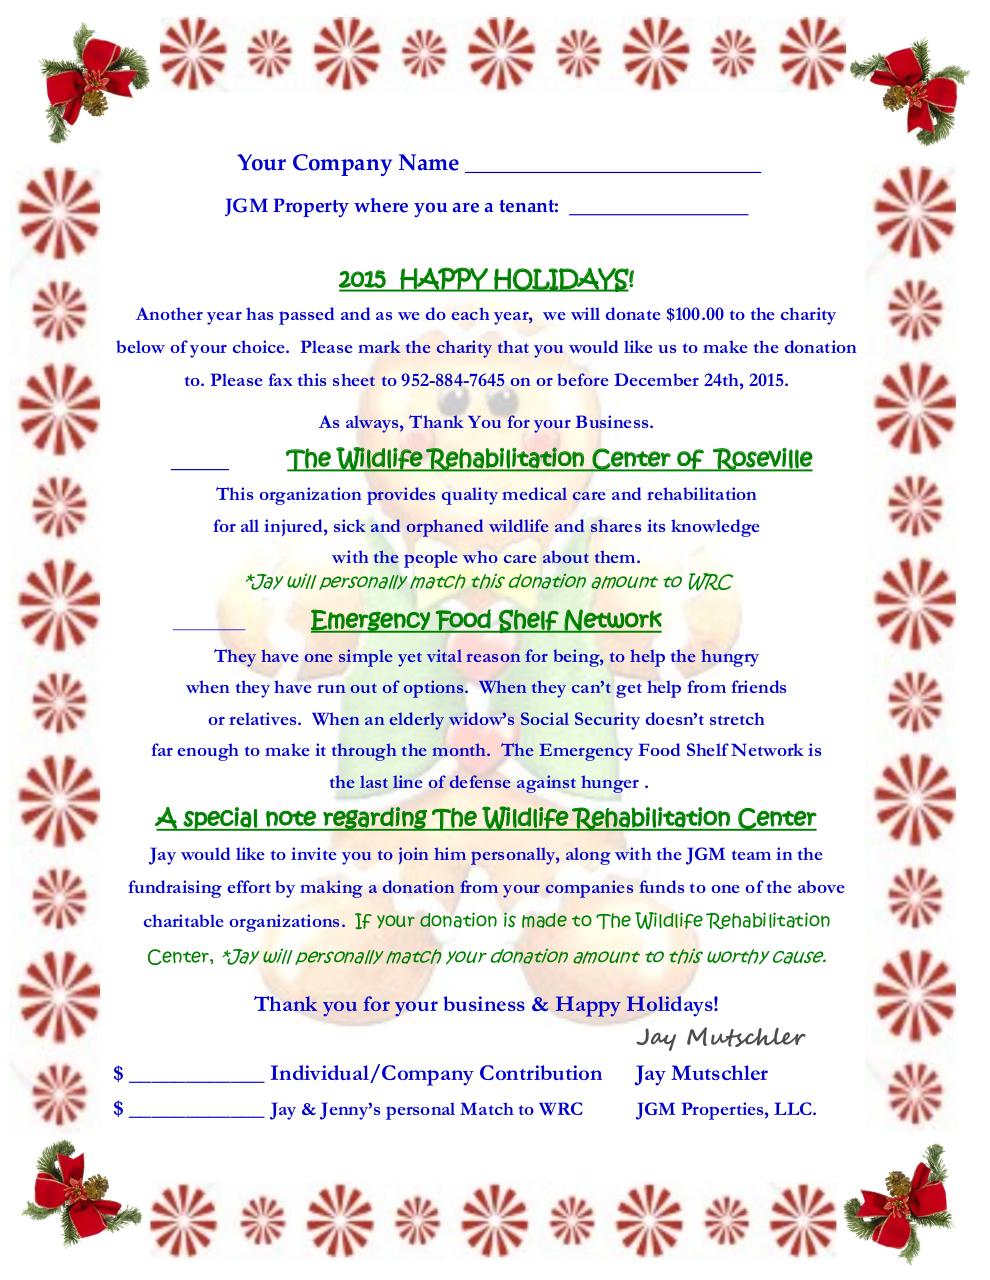 Document preview $100.00 2015 christmas contribution_ms.pdf - page 1/1